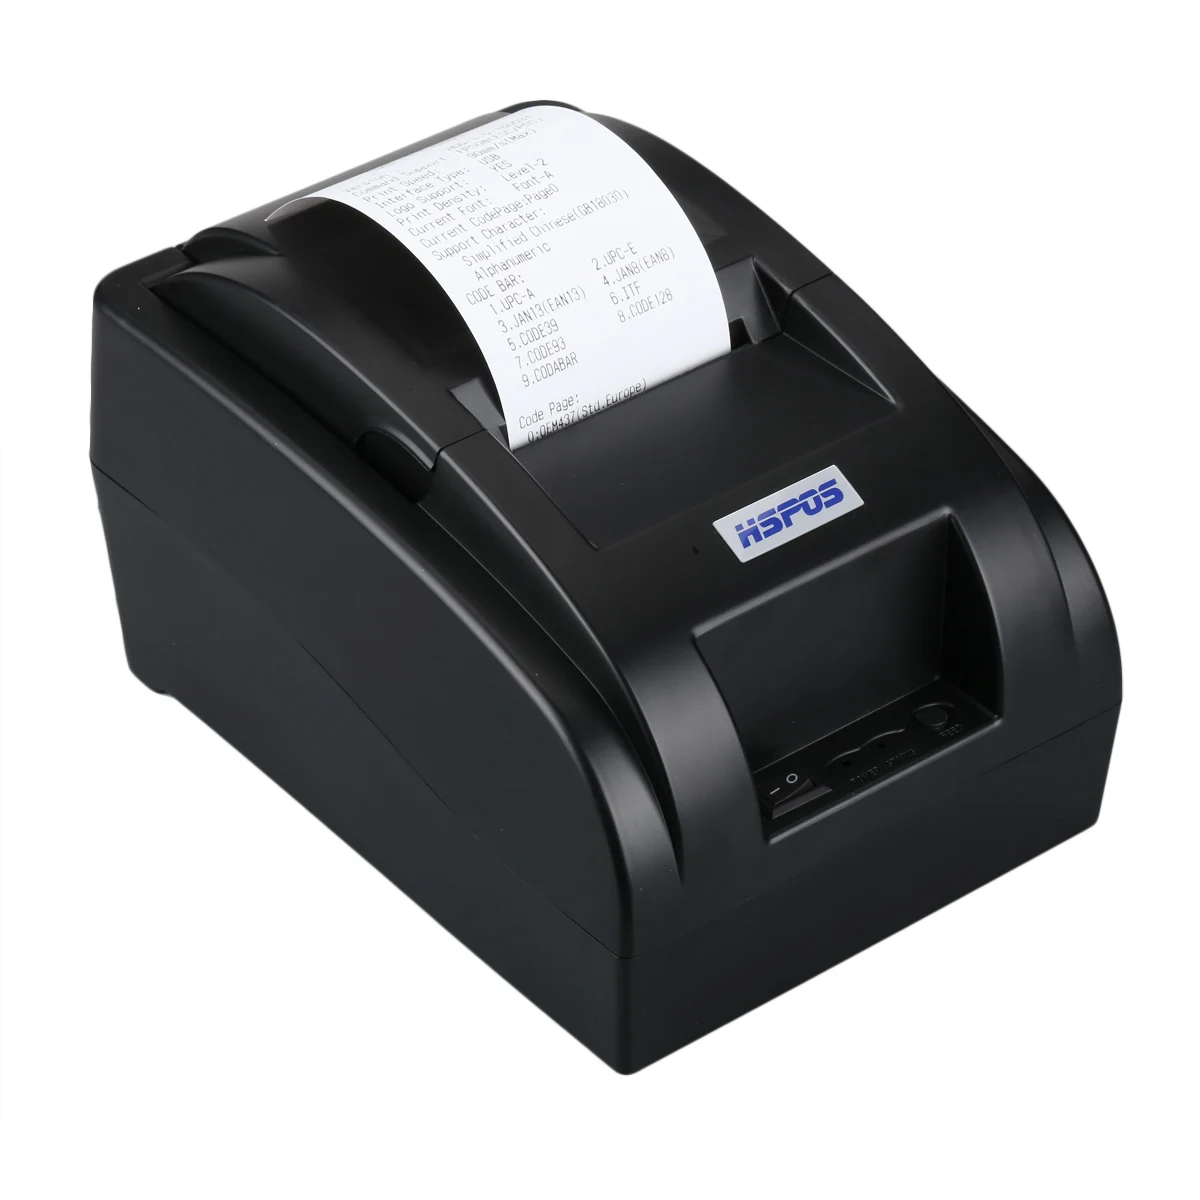 

Cheap Price 2 inch Thermal Receipt Printer POS Support Many Language and One Year Warranty HS-58HU